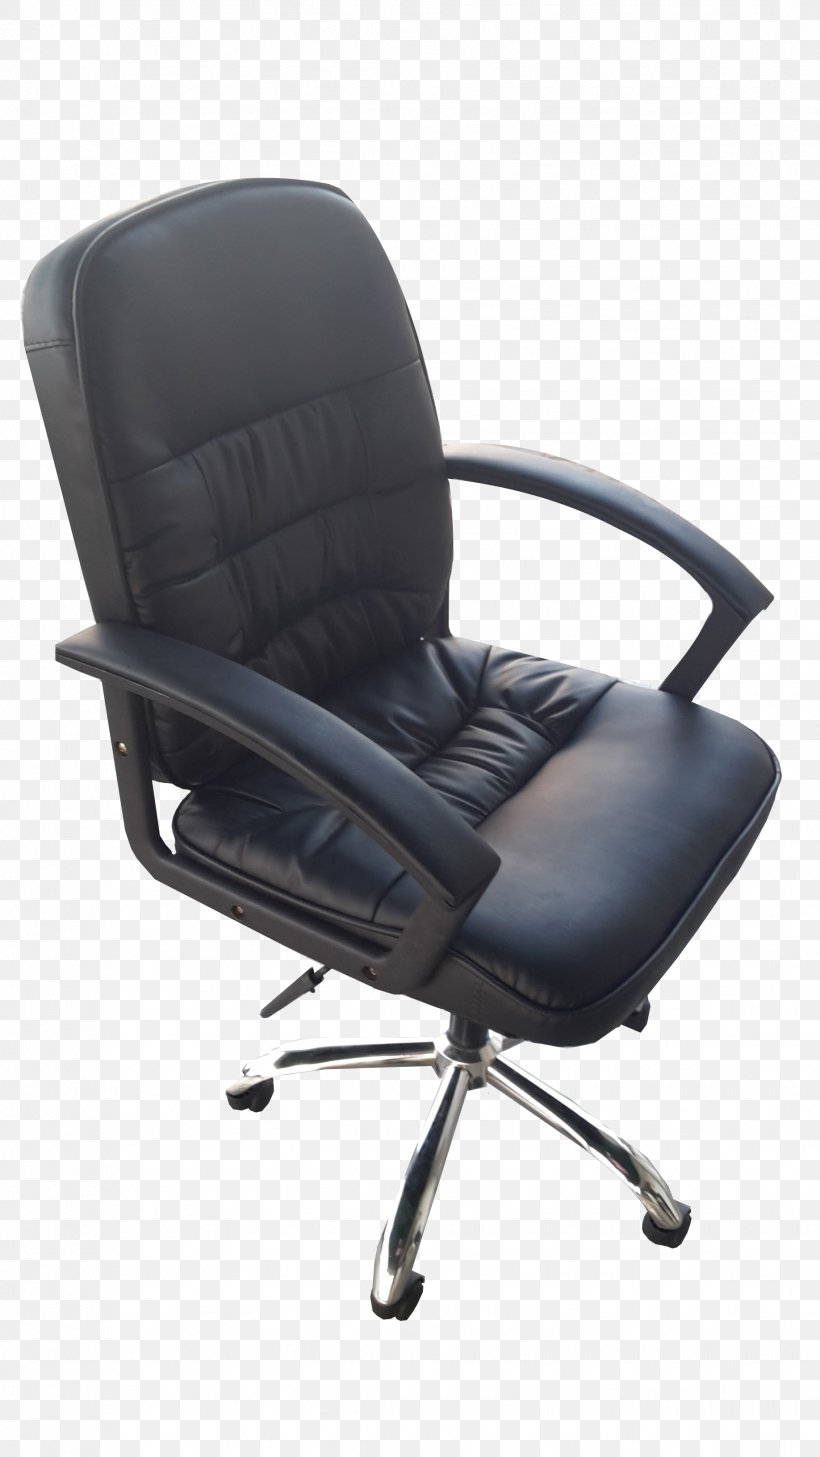 Office & Desk Chairs Armrest Comfort, PNG, 1836x3264px, Office Desk Chairs, Armrest, Chair, Comfort, Furniture Download Free